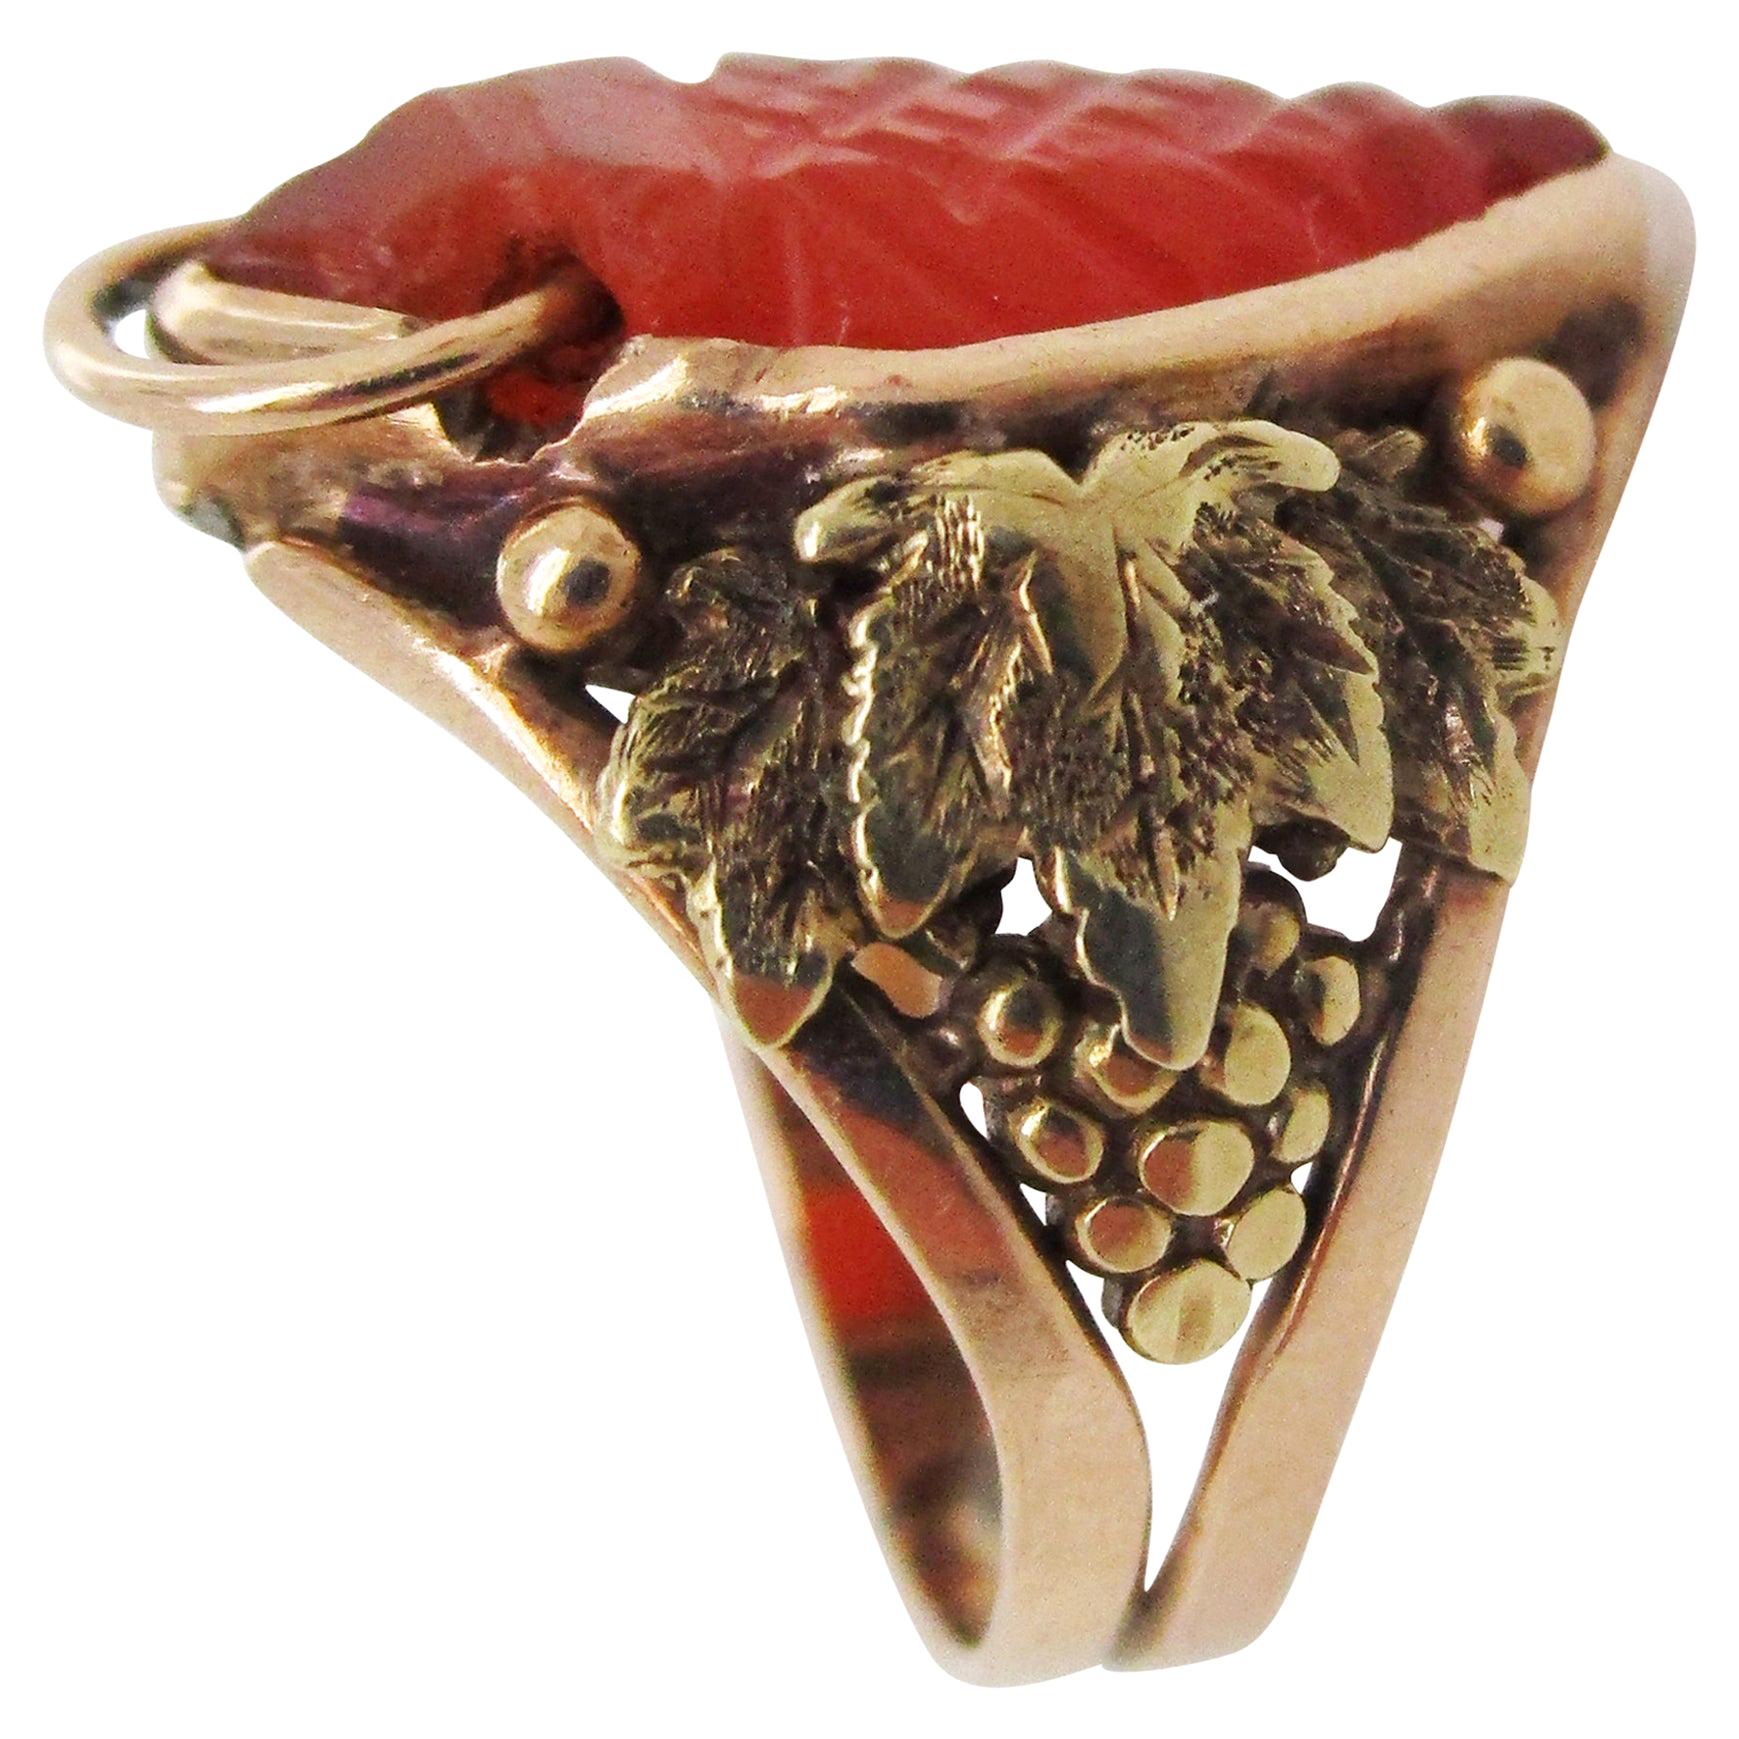 This gorgeous ring exemplifies the best of the Arts and Crafts movement in its spectacular combination of 14k yellow gold, repurposed carved carnelian, and hand-crafted grape and leaf motifs set ever so delicately on the shoulders! The center stone